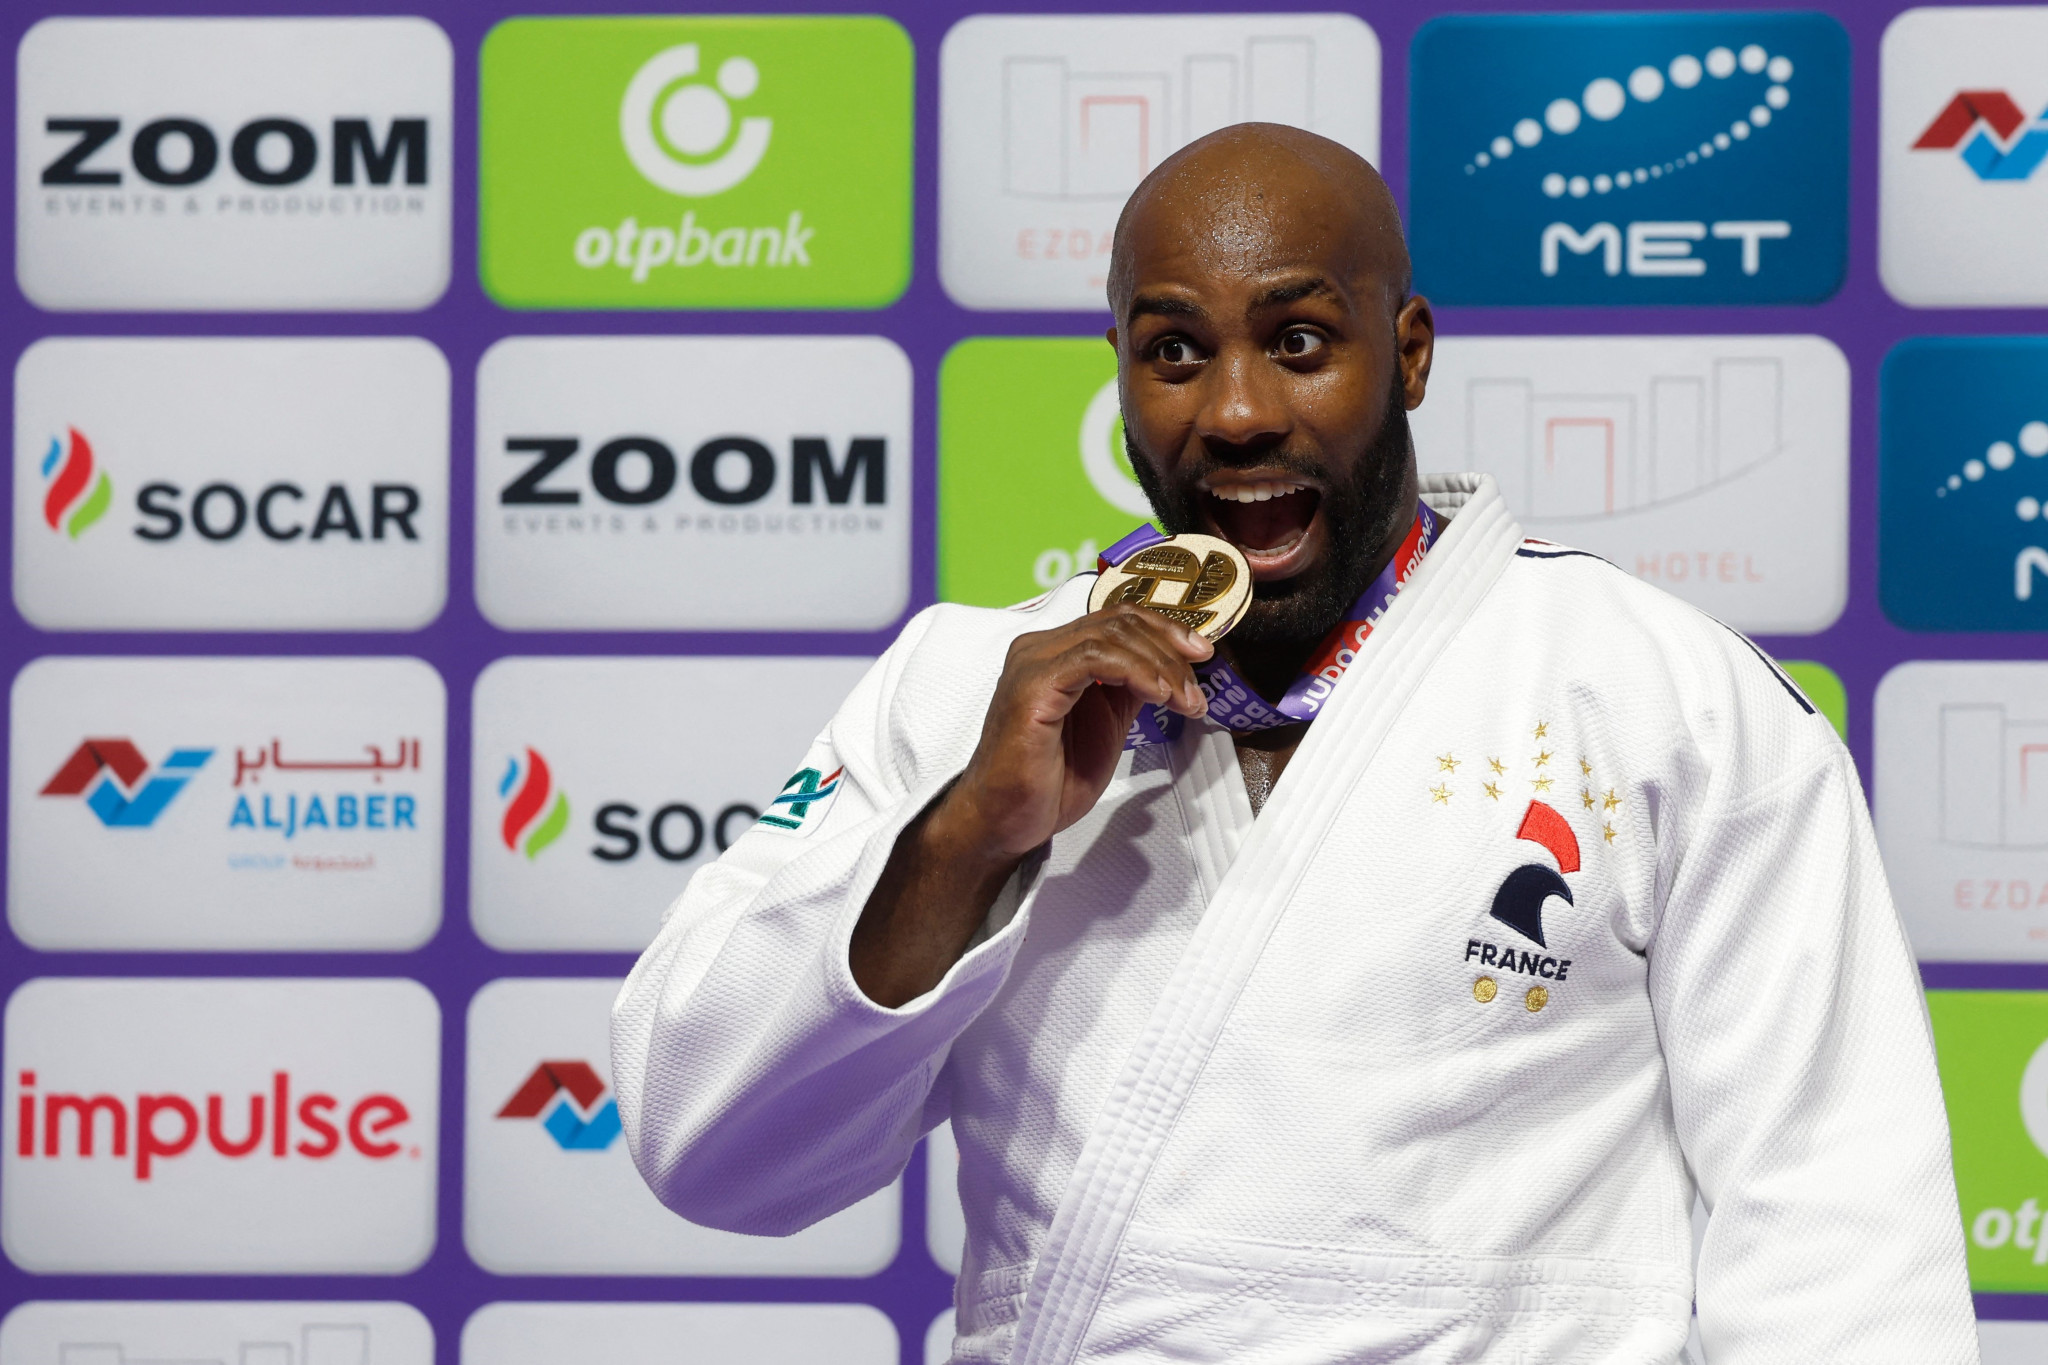 France's Teddy Riner takes a bite into his 11th world gold following his triumph in Doha ©Getty Images